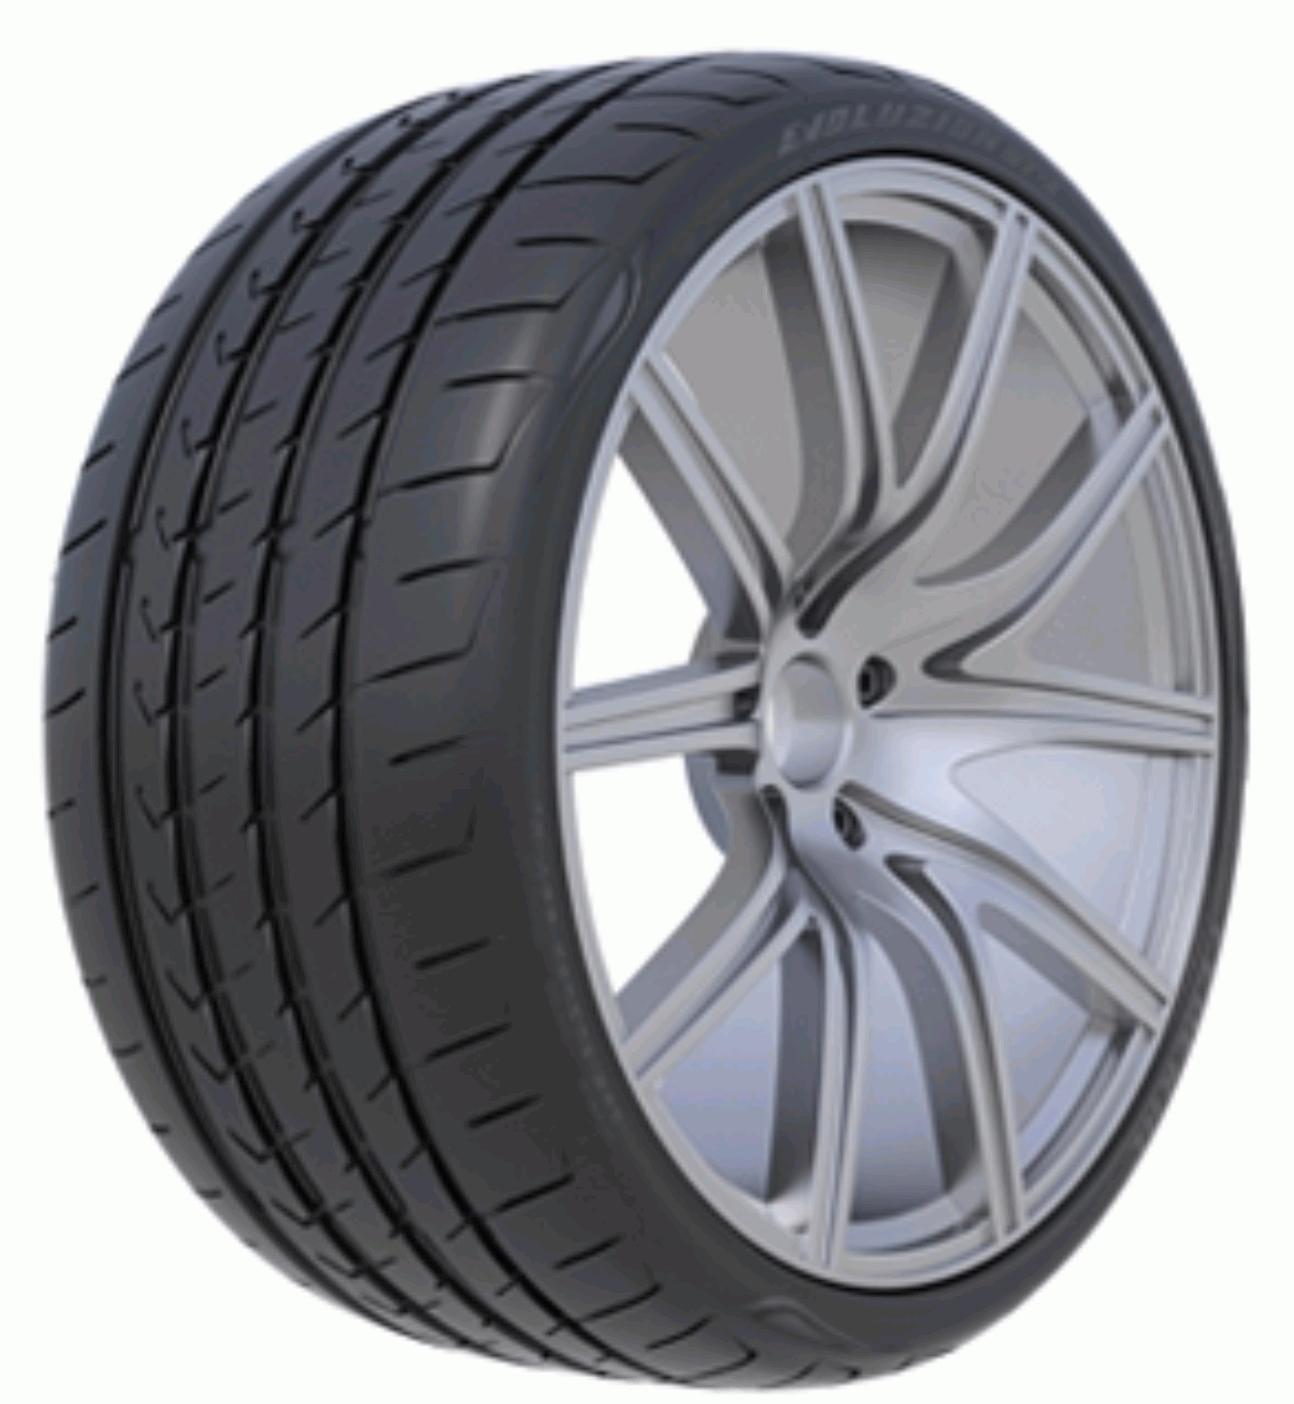 Federal Evoluzion ST 1 - Tyre Tests and Reviews @ Tyre Reviews